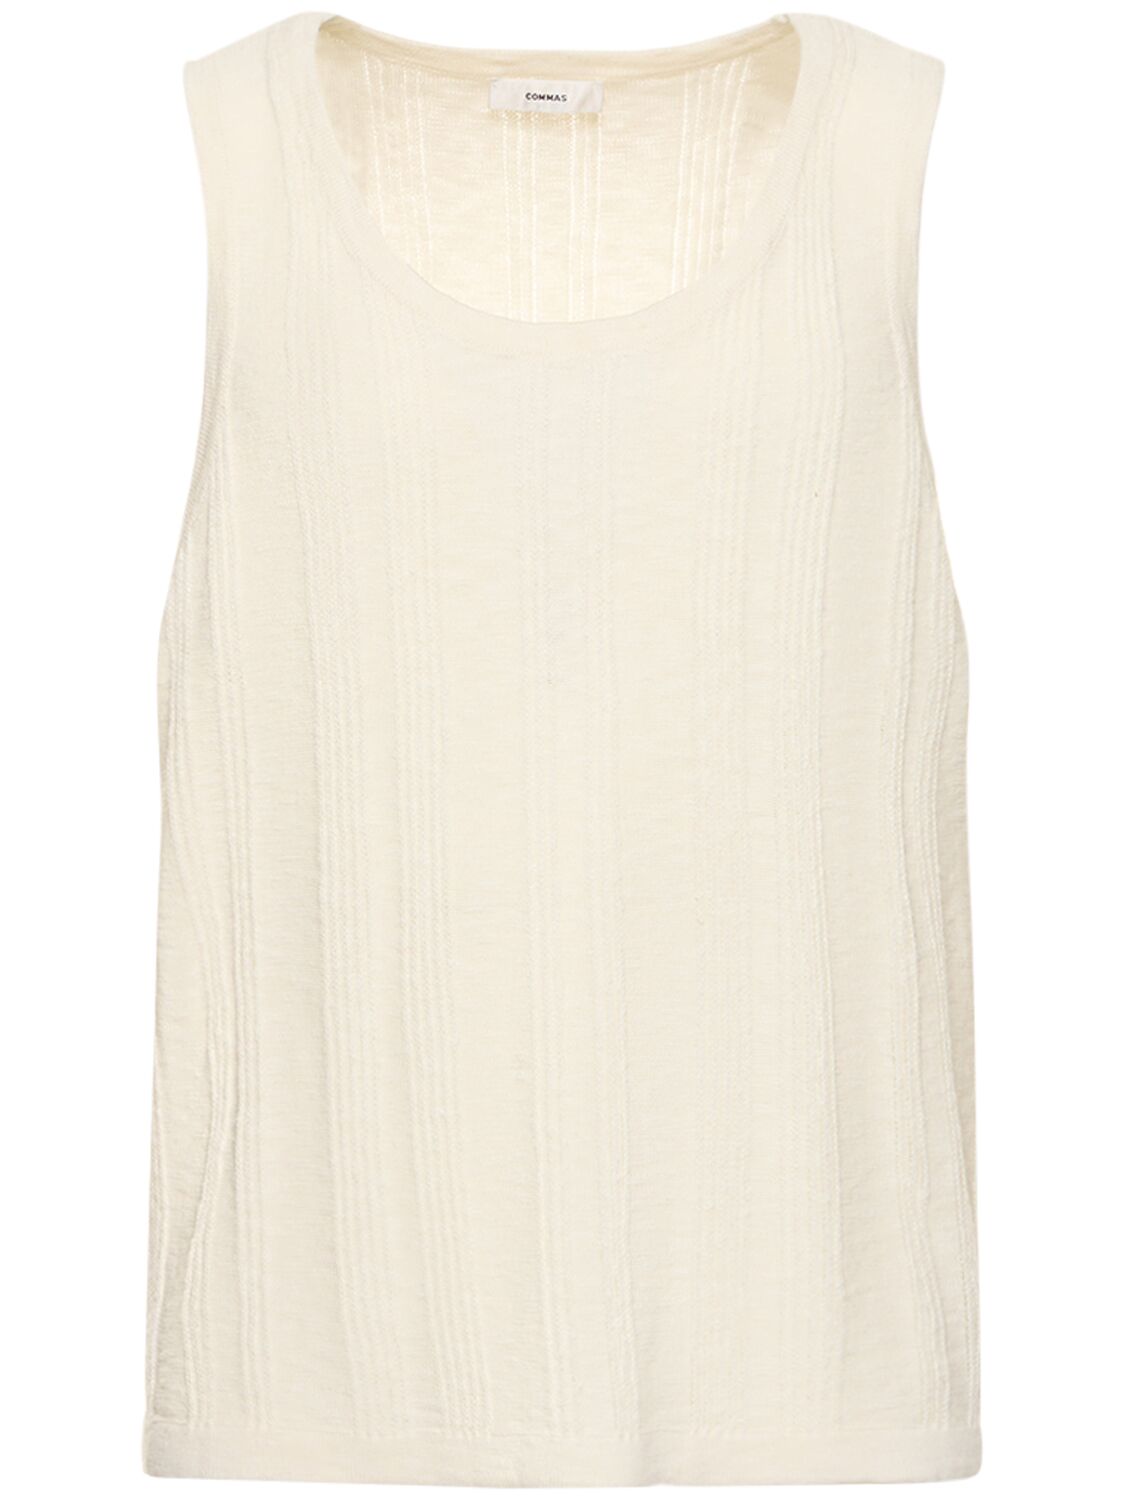 Image of Textured Knit Tank Top